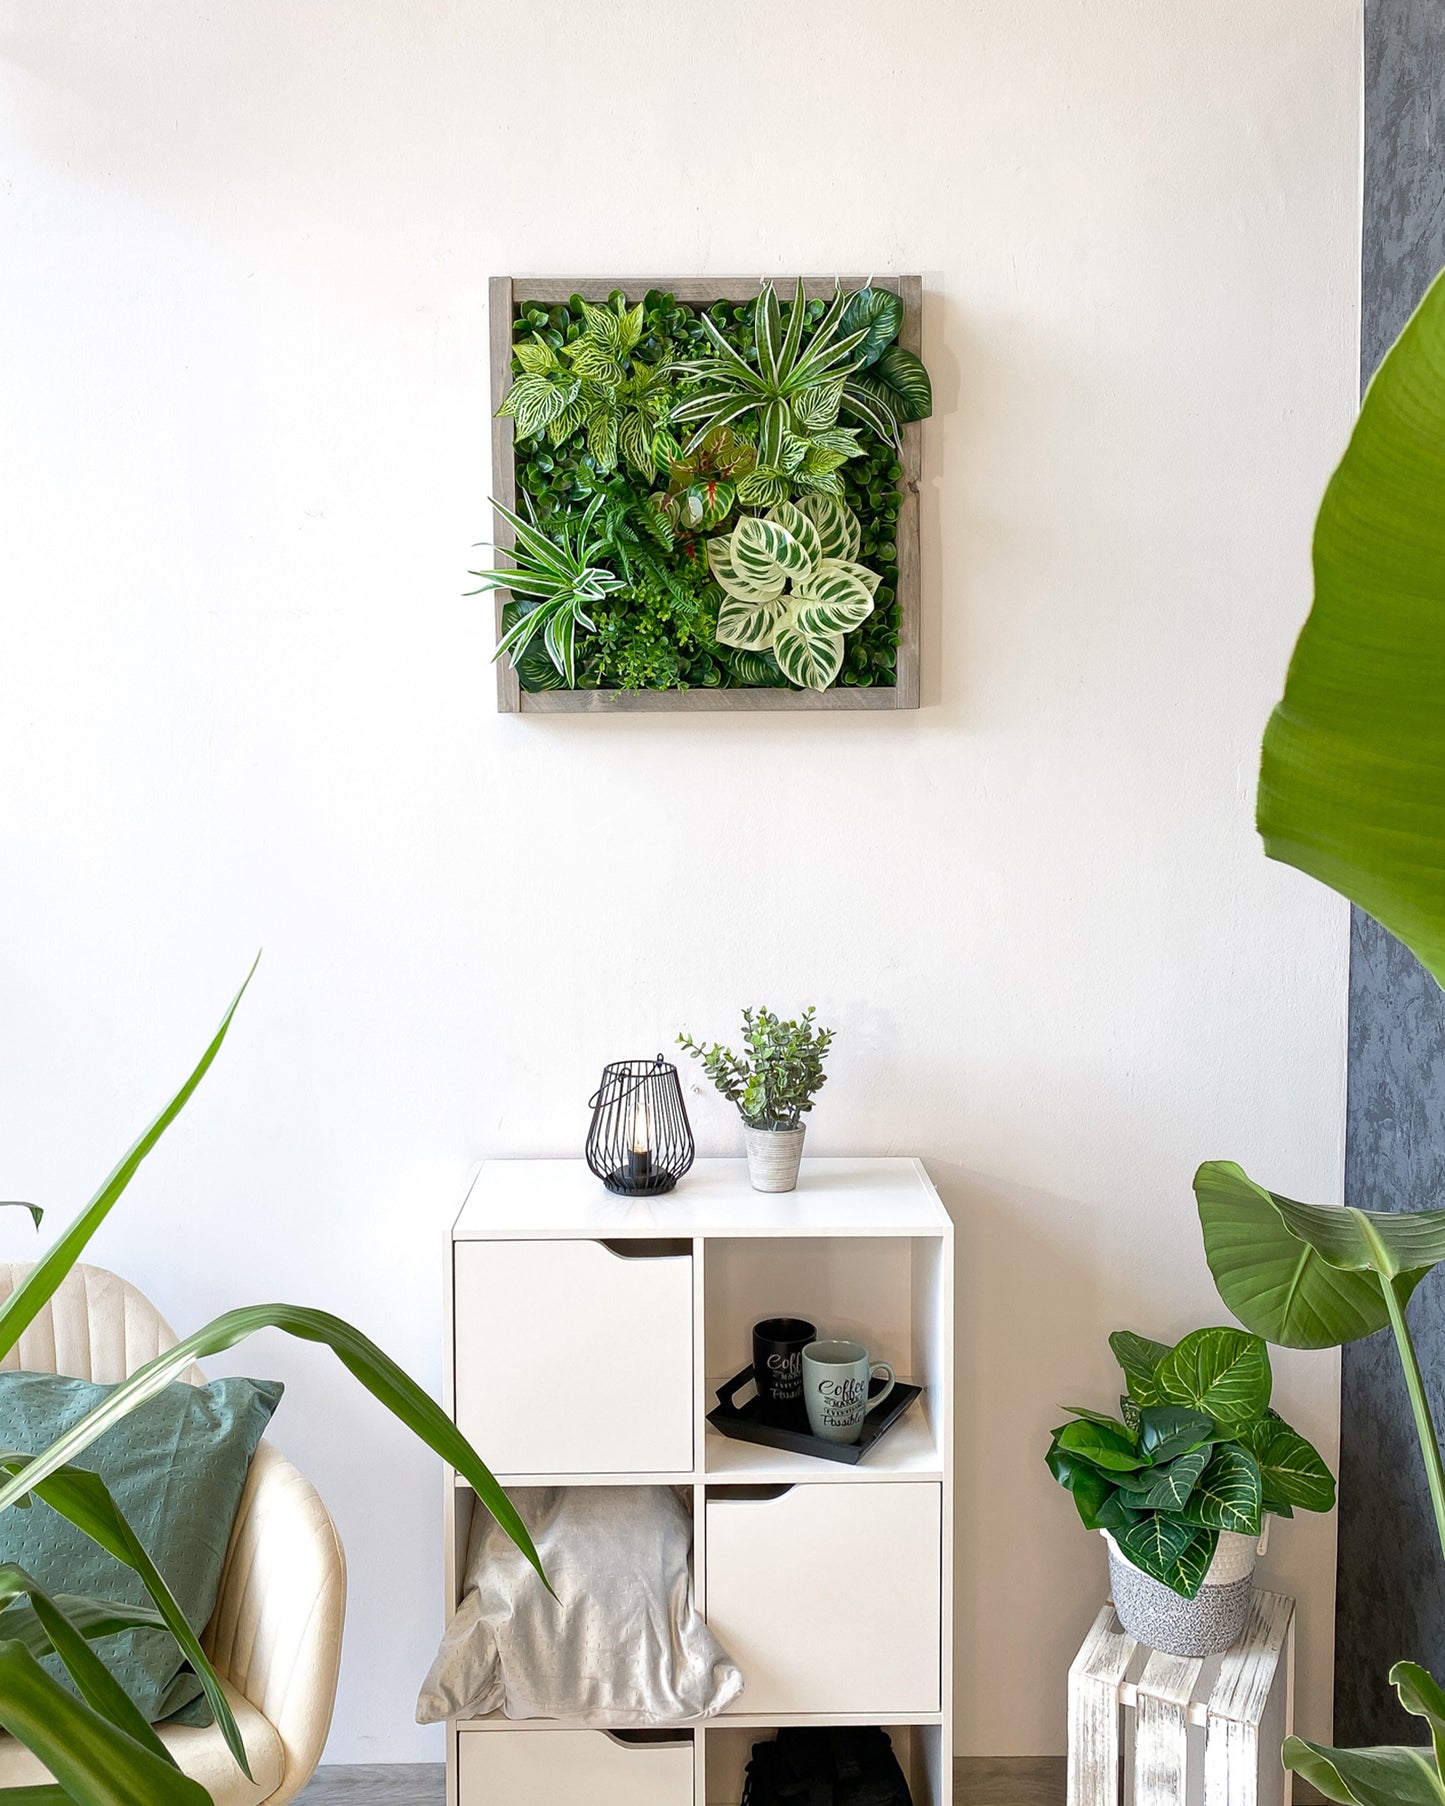 Plantframe/plant wall/moss wall "NUBLAR" made of Realtouch artificial plants with brown spruce wood frame